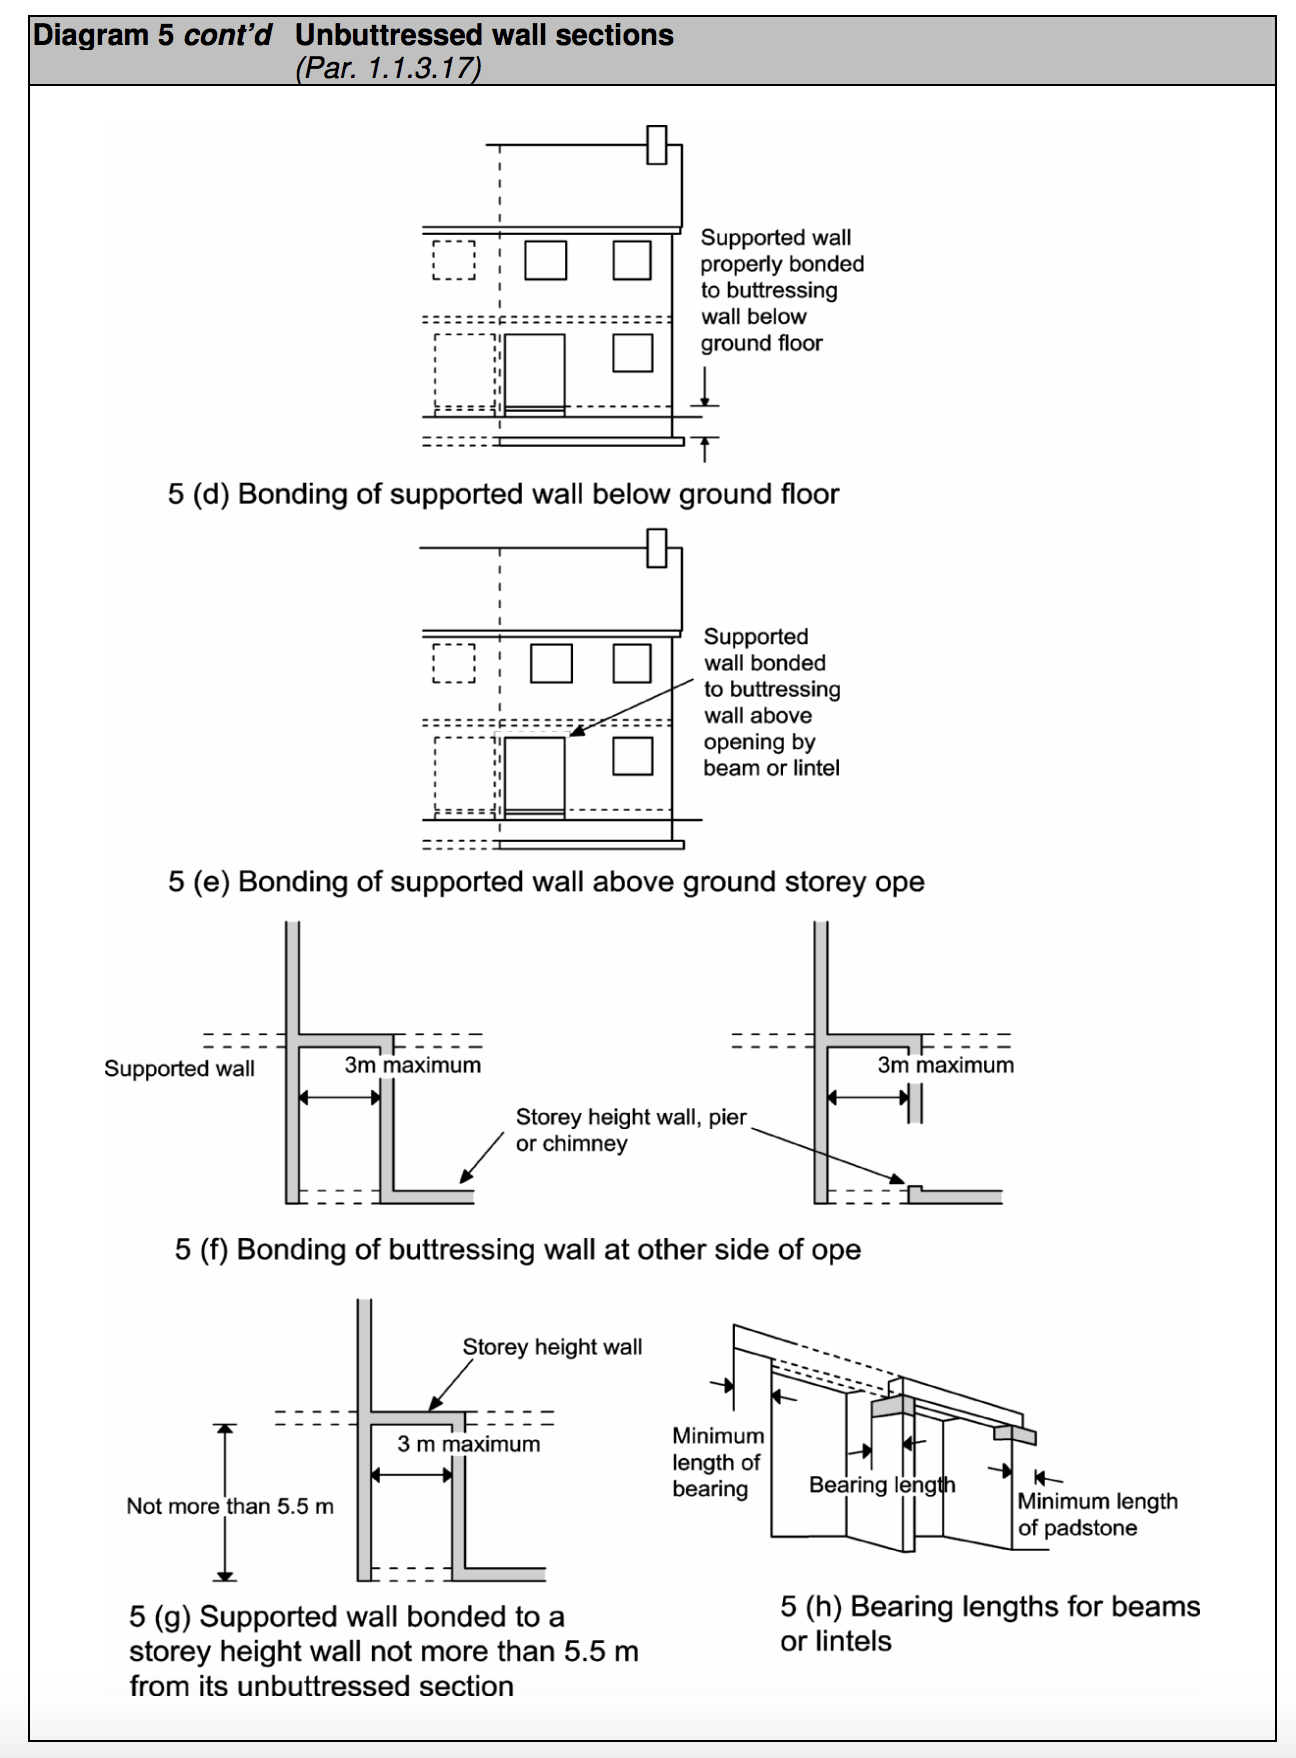 Diagram HA5b - Unbuttressed wall sections Extract from TGD A